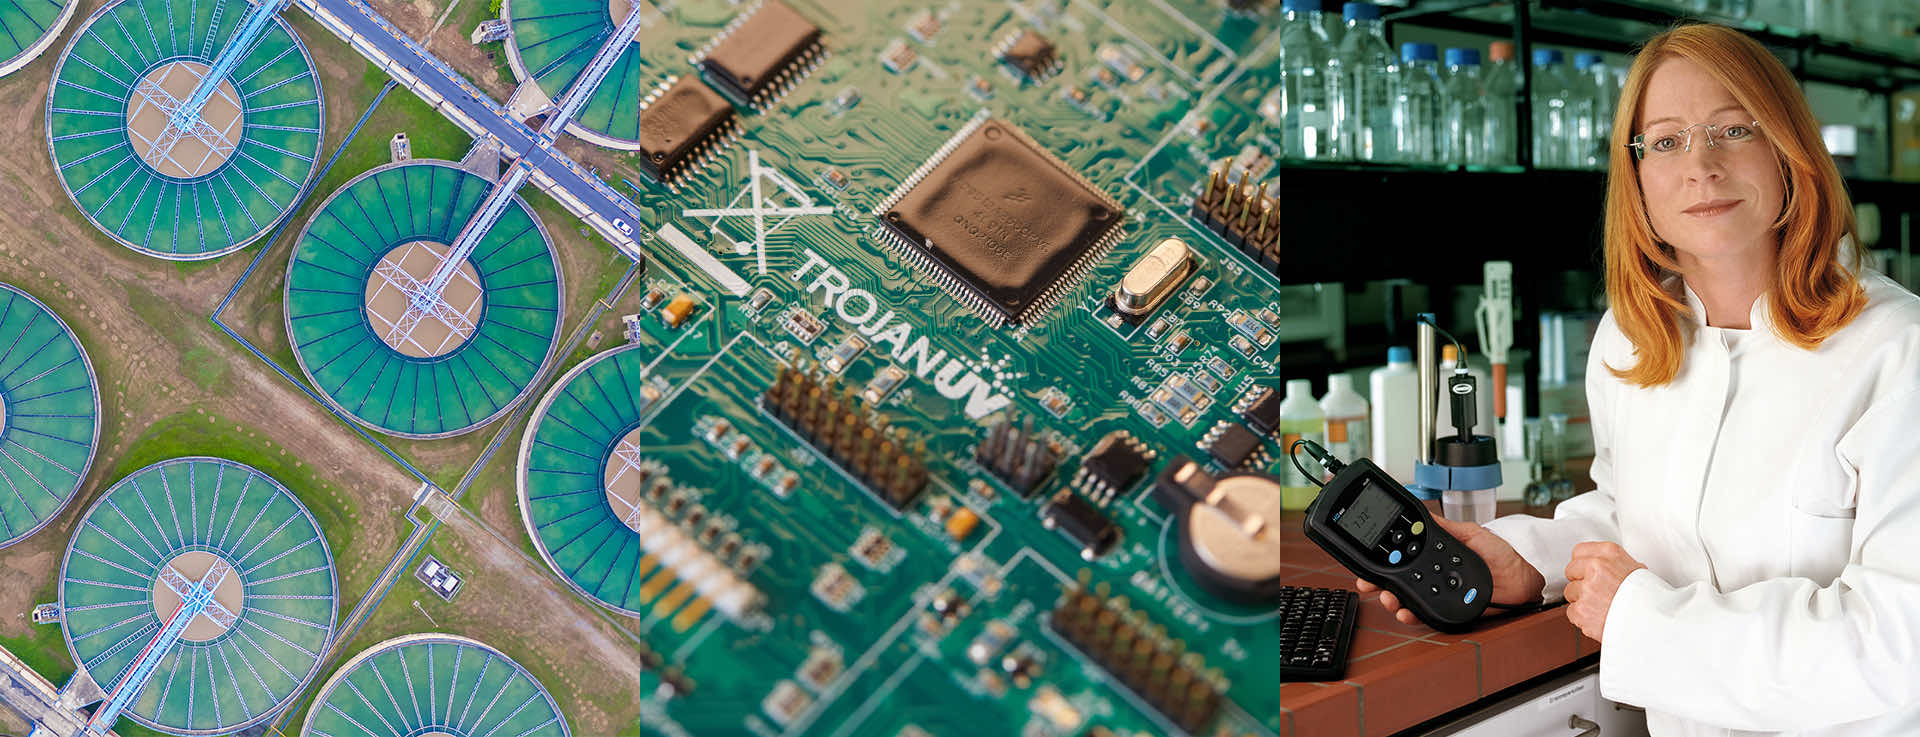 Triptych aerial view of a water treatment plant, close-up view of a TrojanUV circuit board, Hach scientist in lab